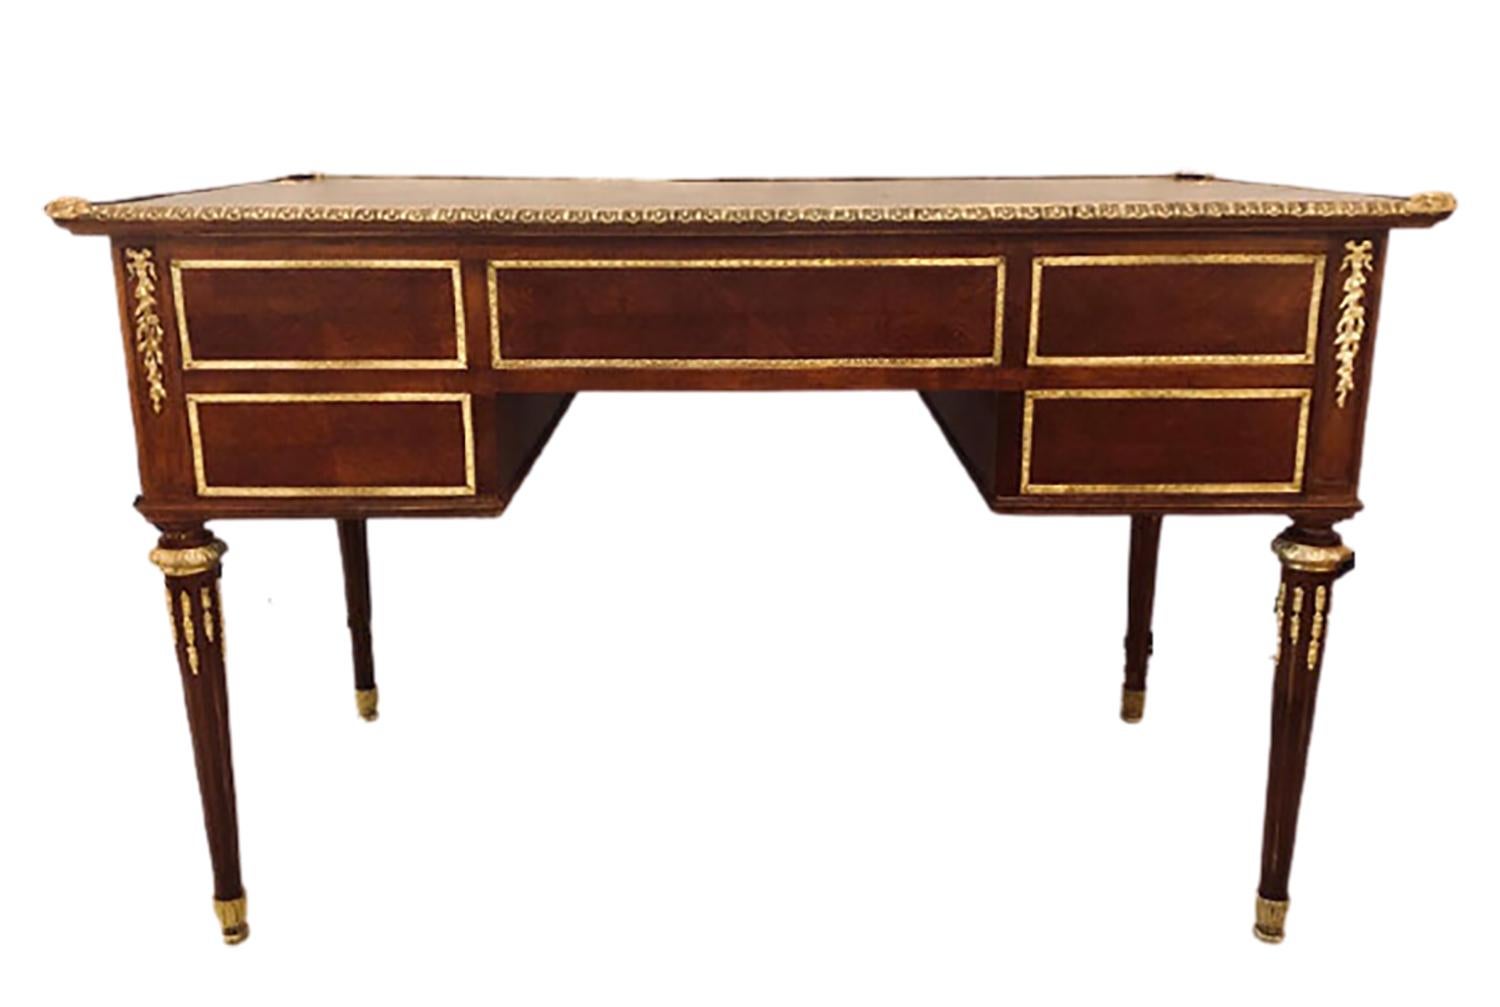 Louis XVI style bronze mounted mahogany writing desk. The tapering Louis XVI style legs having bronze sabots and mountings inside the strong reeded legs which terminate in bronze capitals. The case with a center bronze framed drawer flanked by